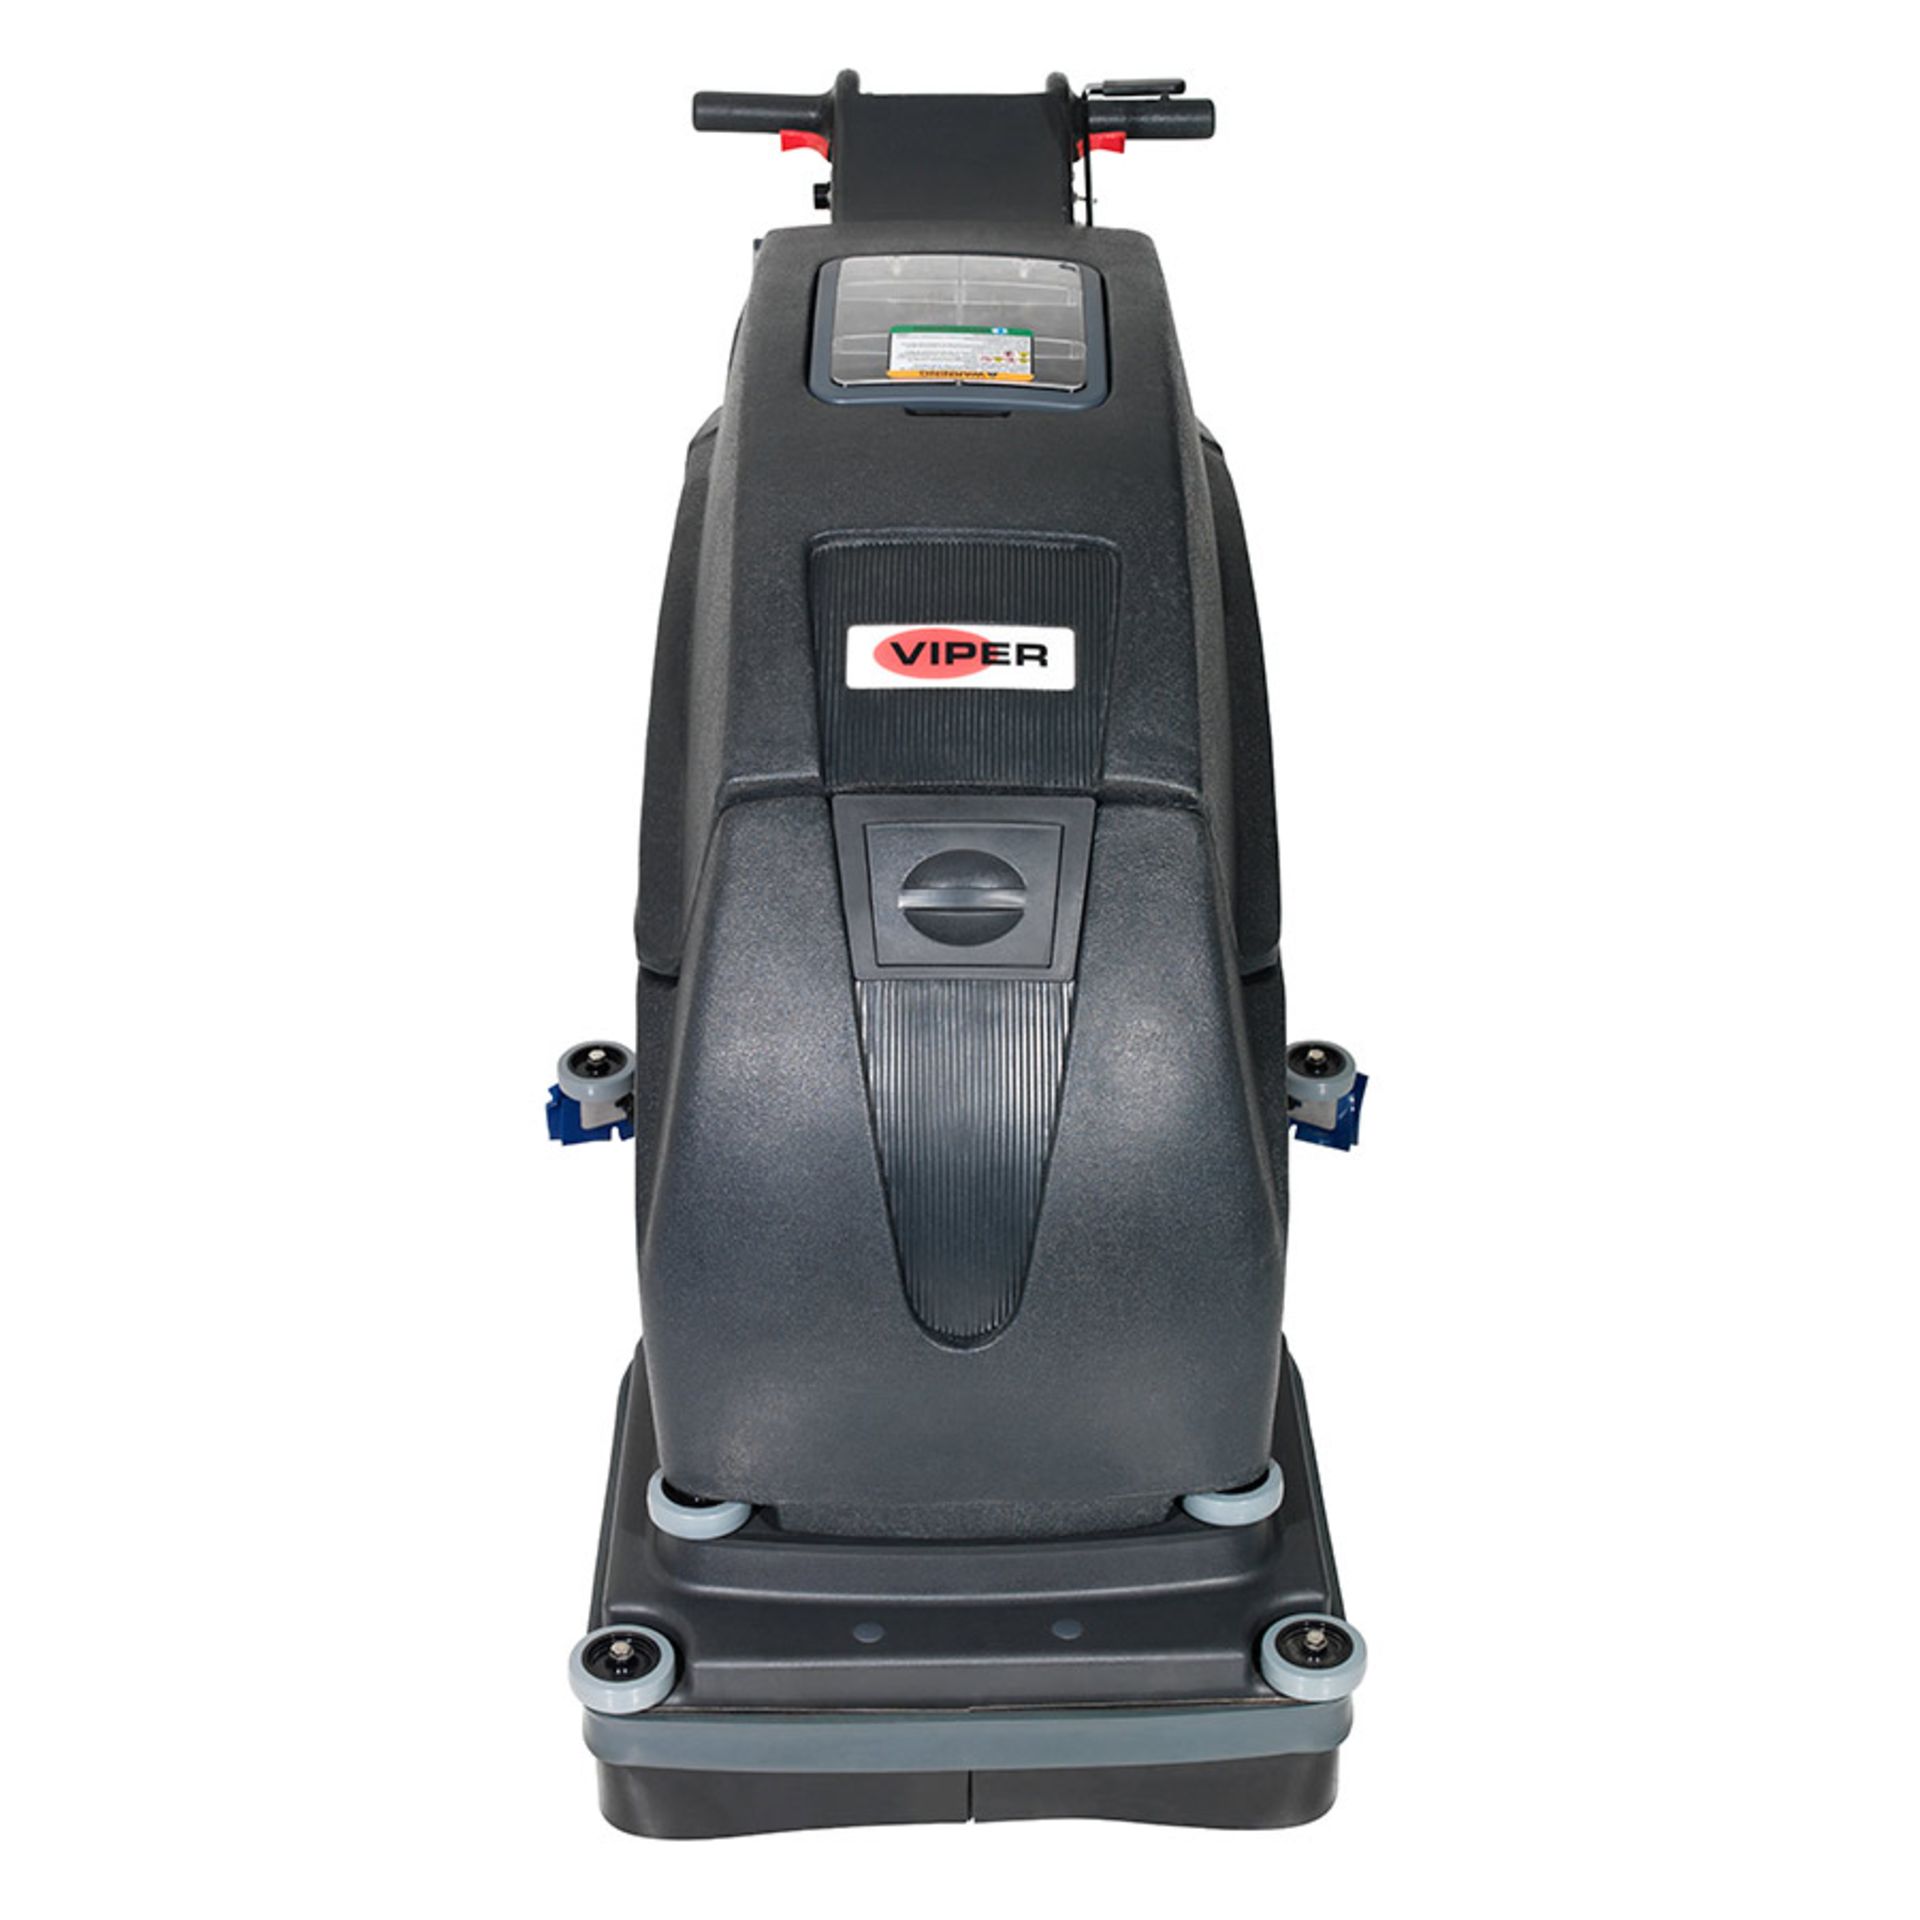 Viper Fang 20HD Walk-behind scrubber dryer. Transaxle drive system.  Light and easy to manoeuvre.